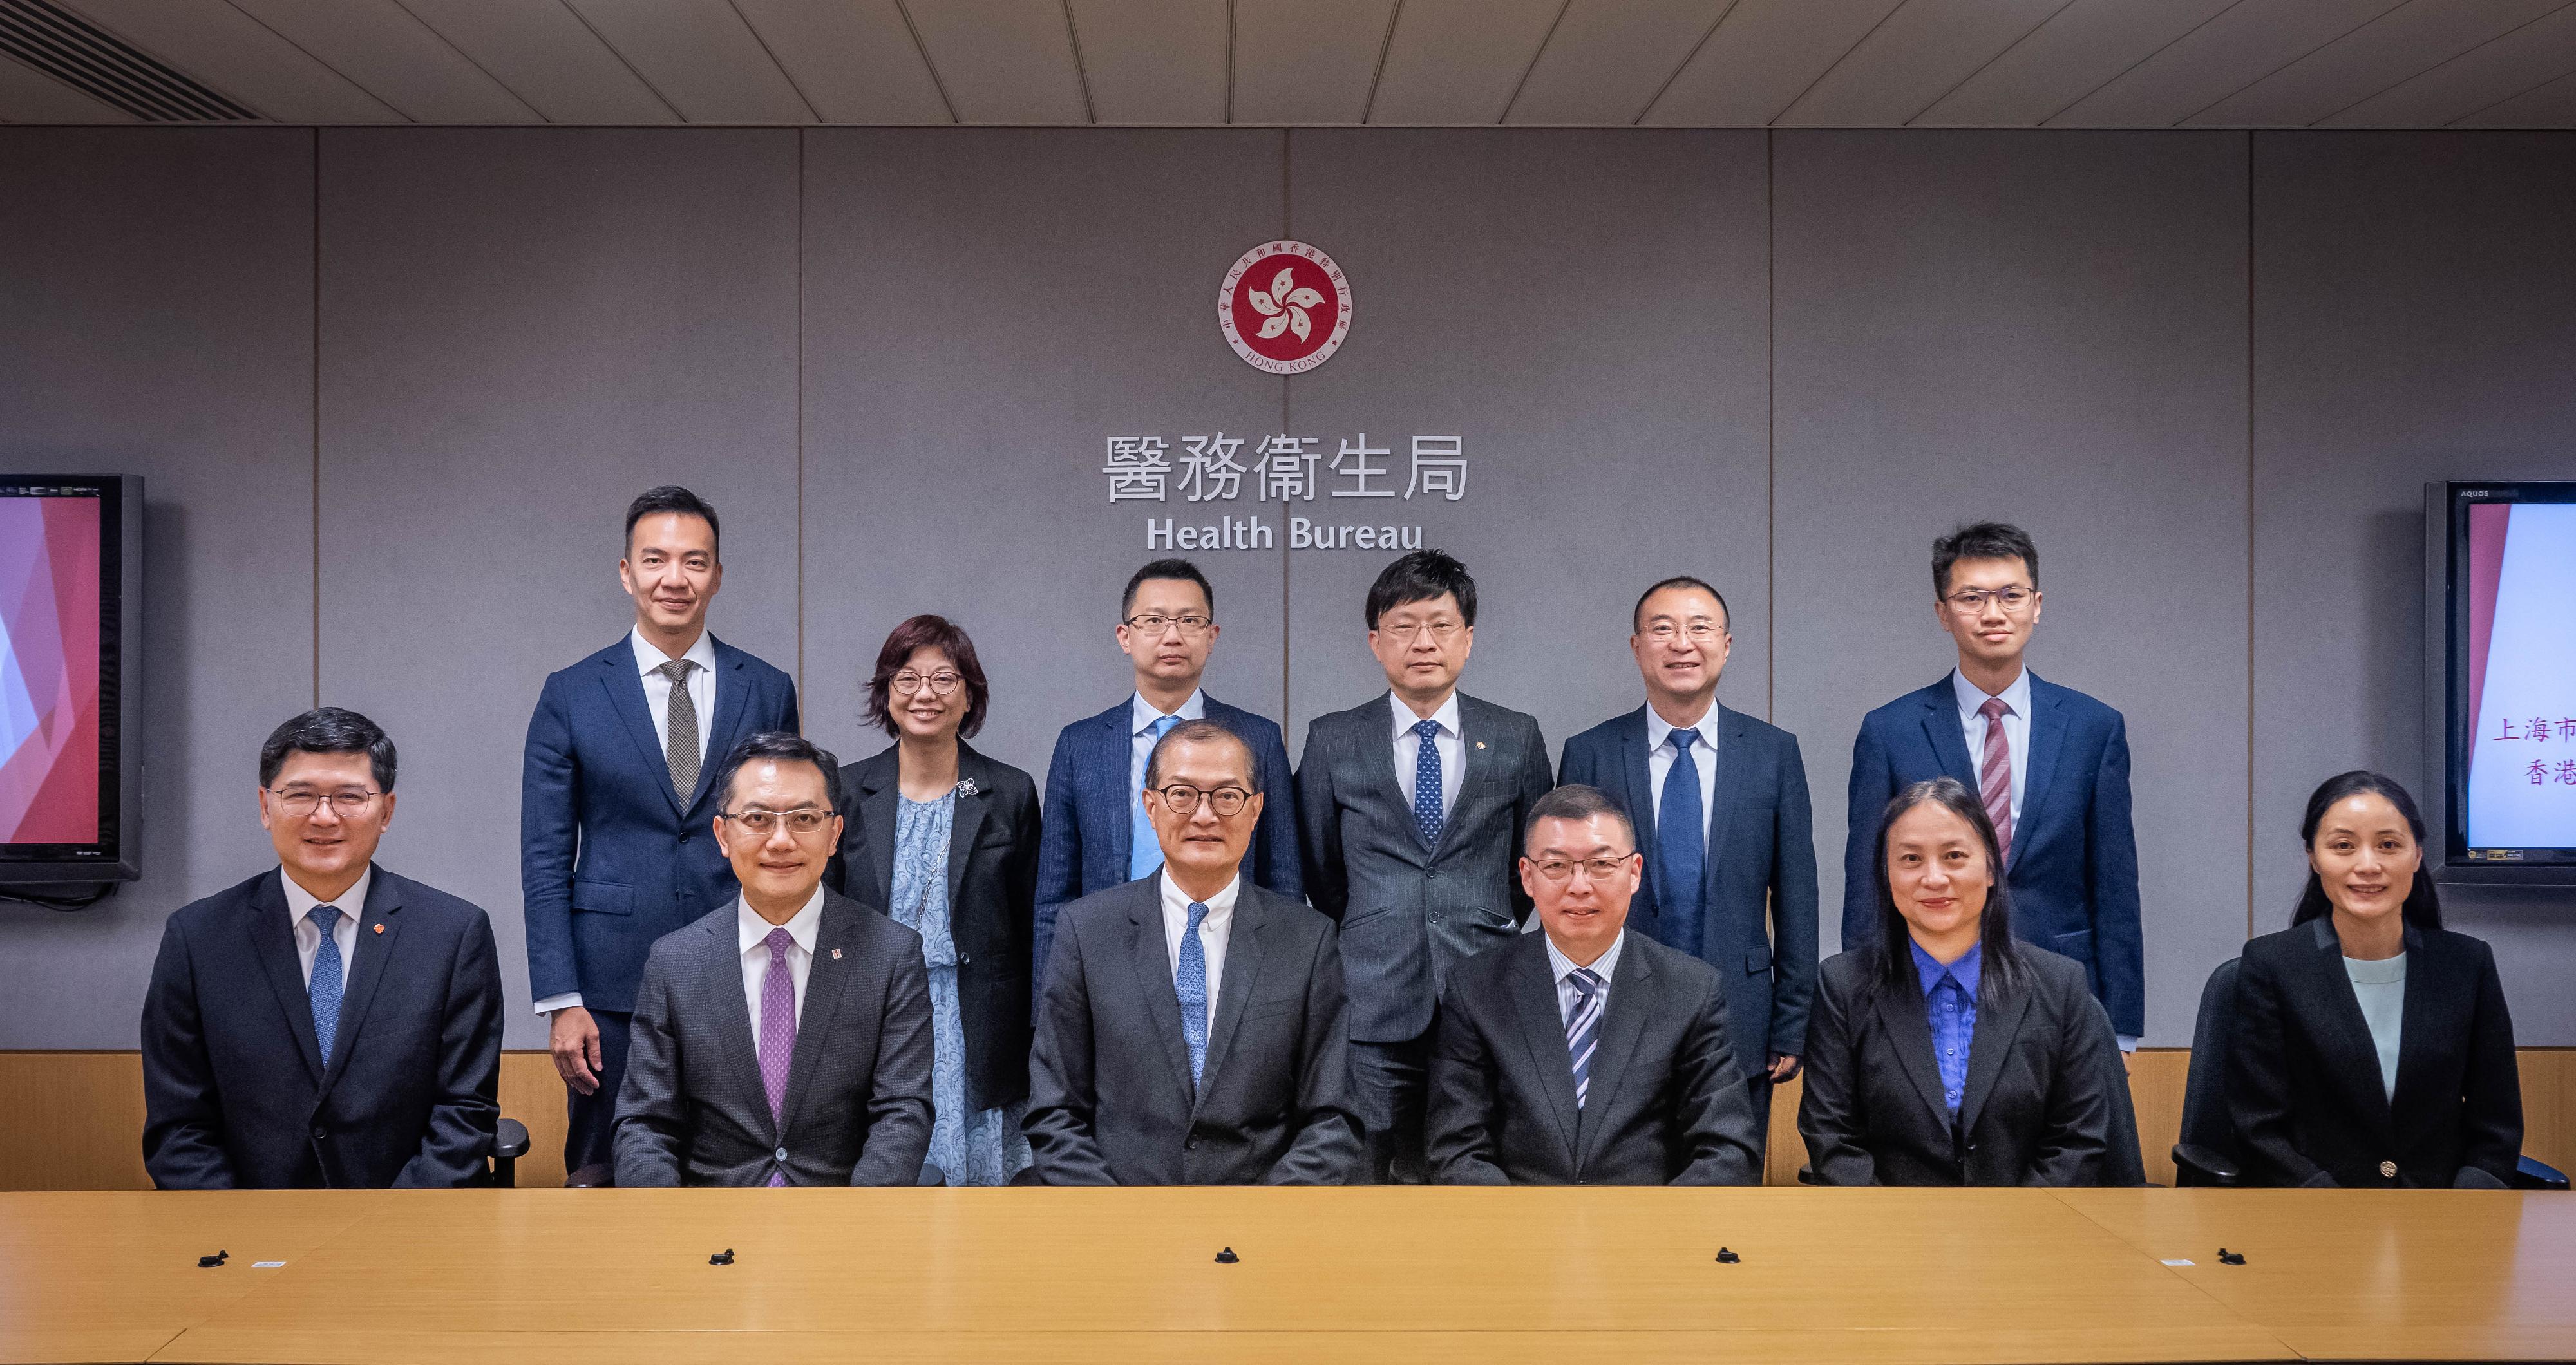 The Secretary for Health, Professor Lo Chung-mau, met with a delegation led by Deputy Director General of the Shanghai Municipal Health Commission Professor Hu Hongyi today (May 17) to explore areas for strengthening healthcare co-operation.  Photo shows Professor Lo (front row, third left); Professor Hu (front row, third right); the Director of Health, Dr Ronald Lam (front row, second left); and the Chief Executive of the Hospital Authority, Dr Tony Ko (front row, first left), with other attendees of the meeting.